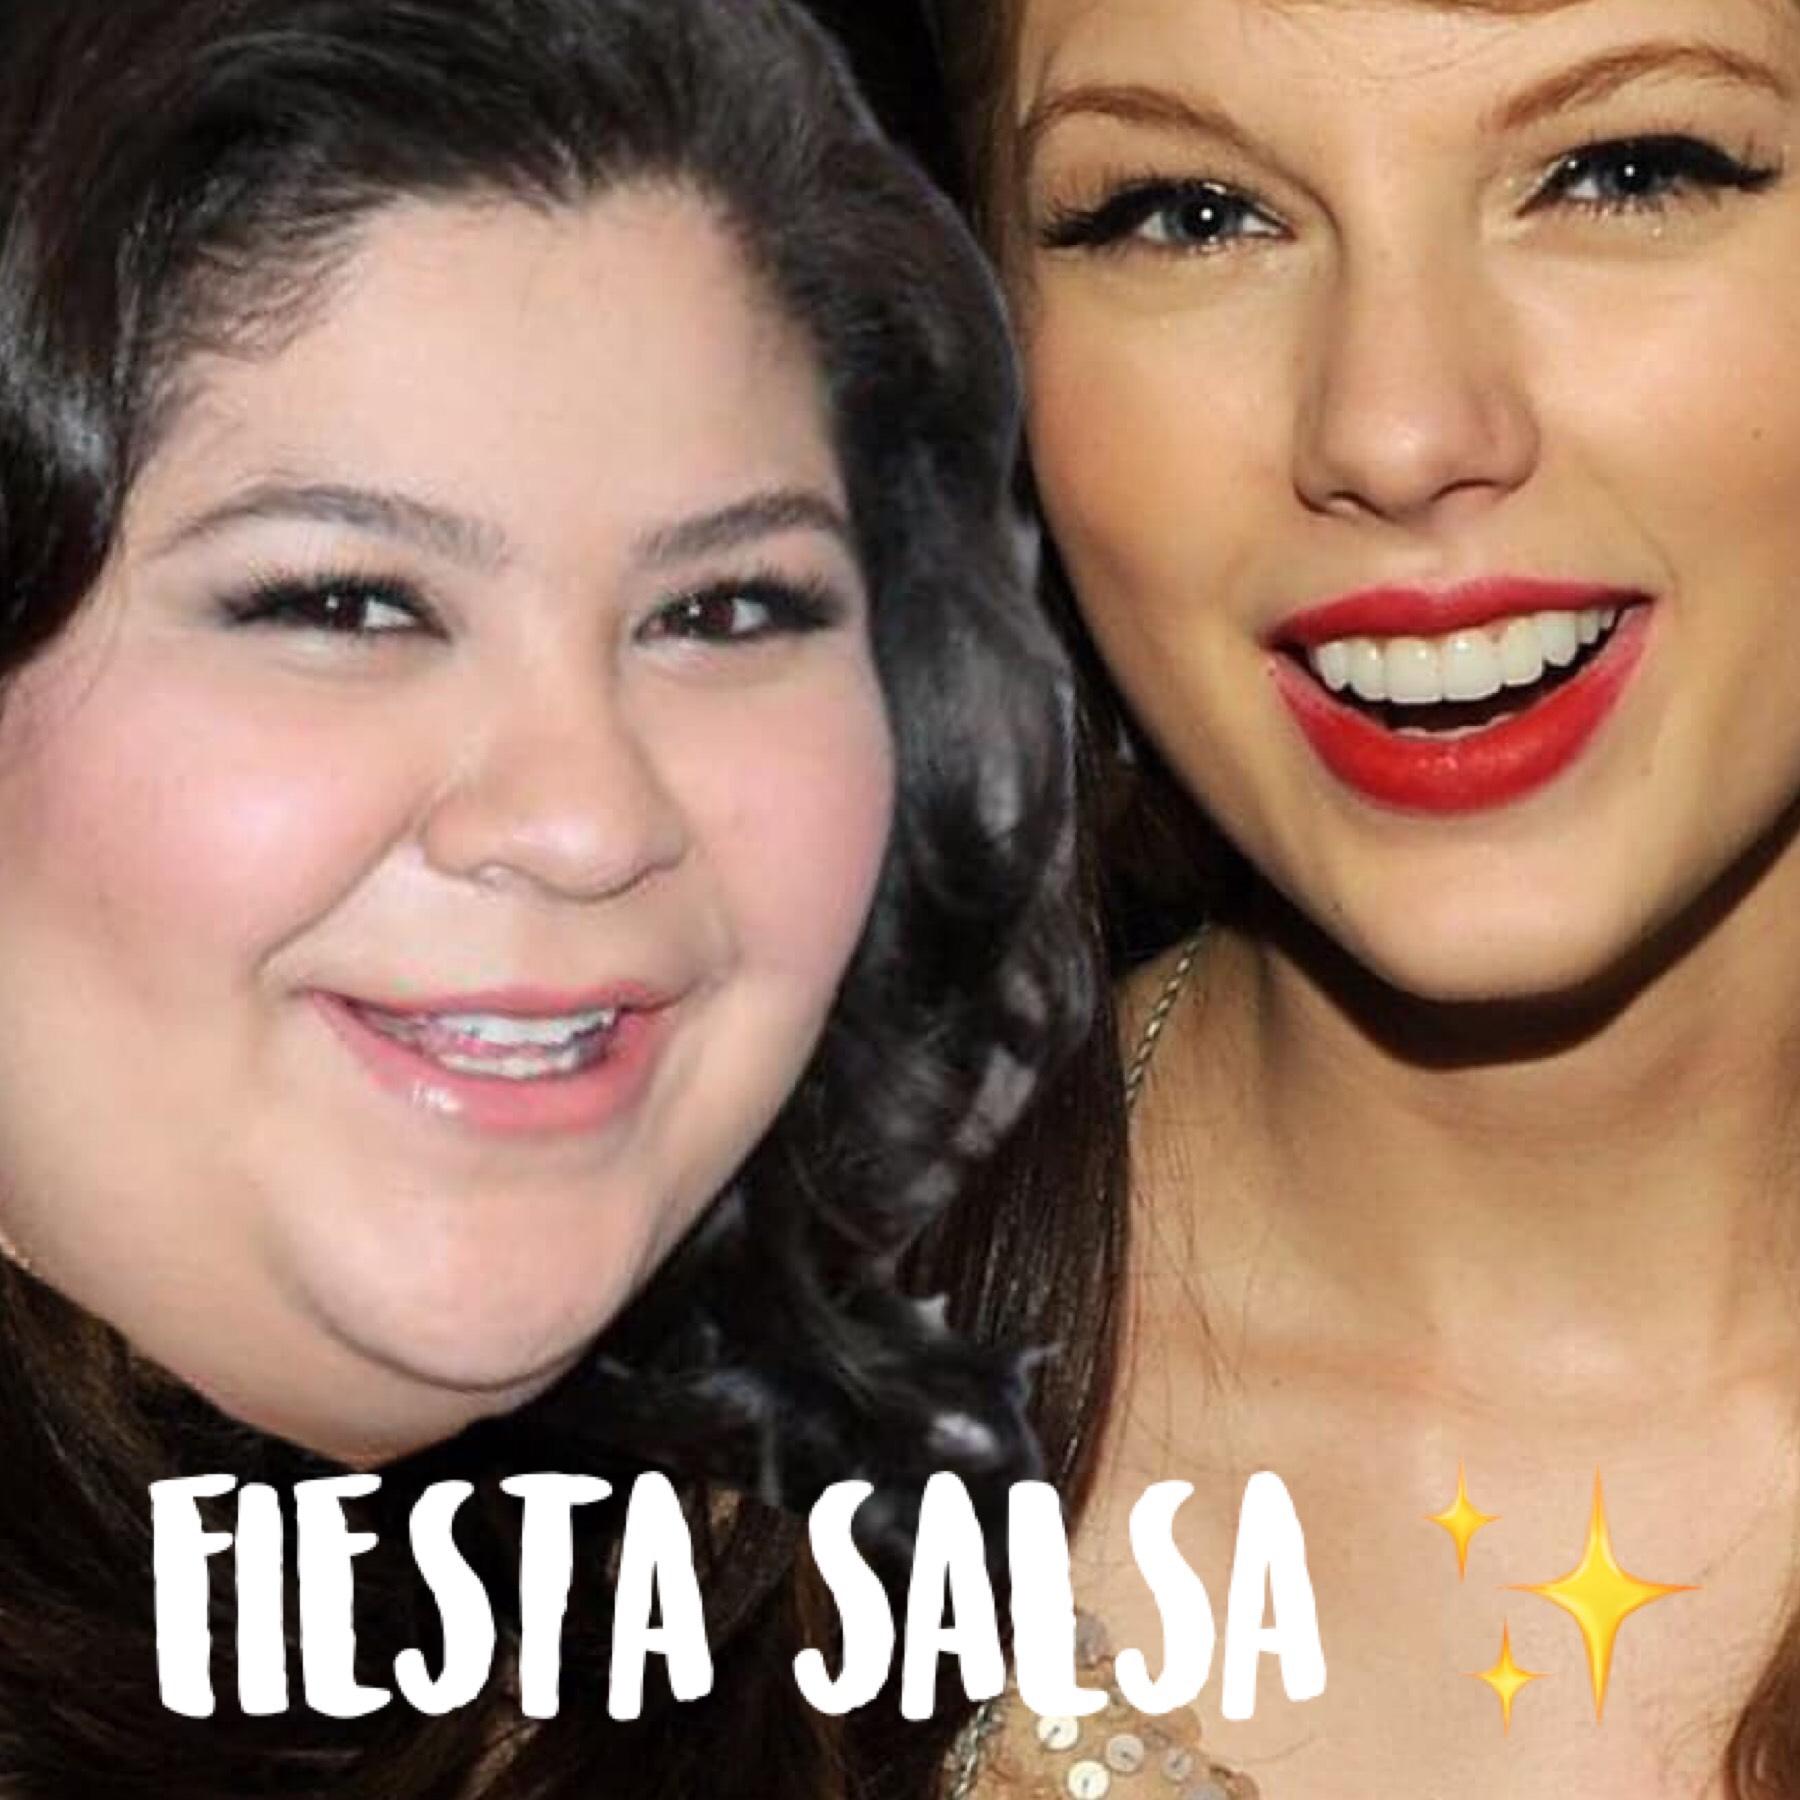 Raini with her best friend Taylor 🤩🤩
They met after one of Raini’s concerts and became best friends because Raini was such an inspiration to Taylor, we love two queens!